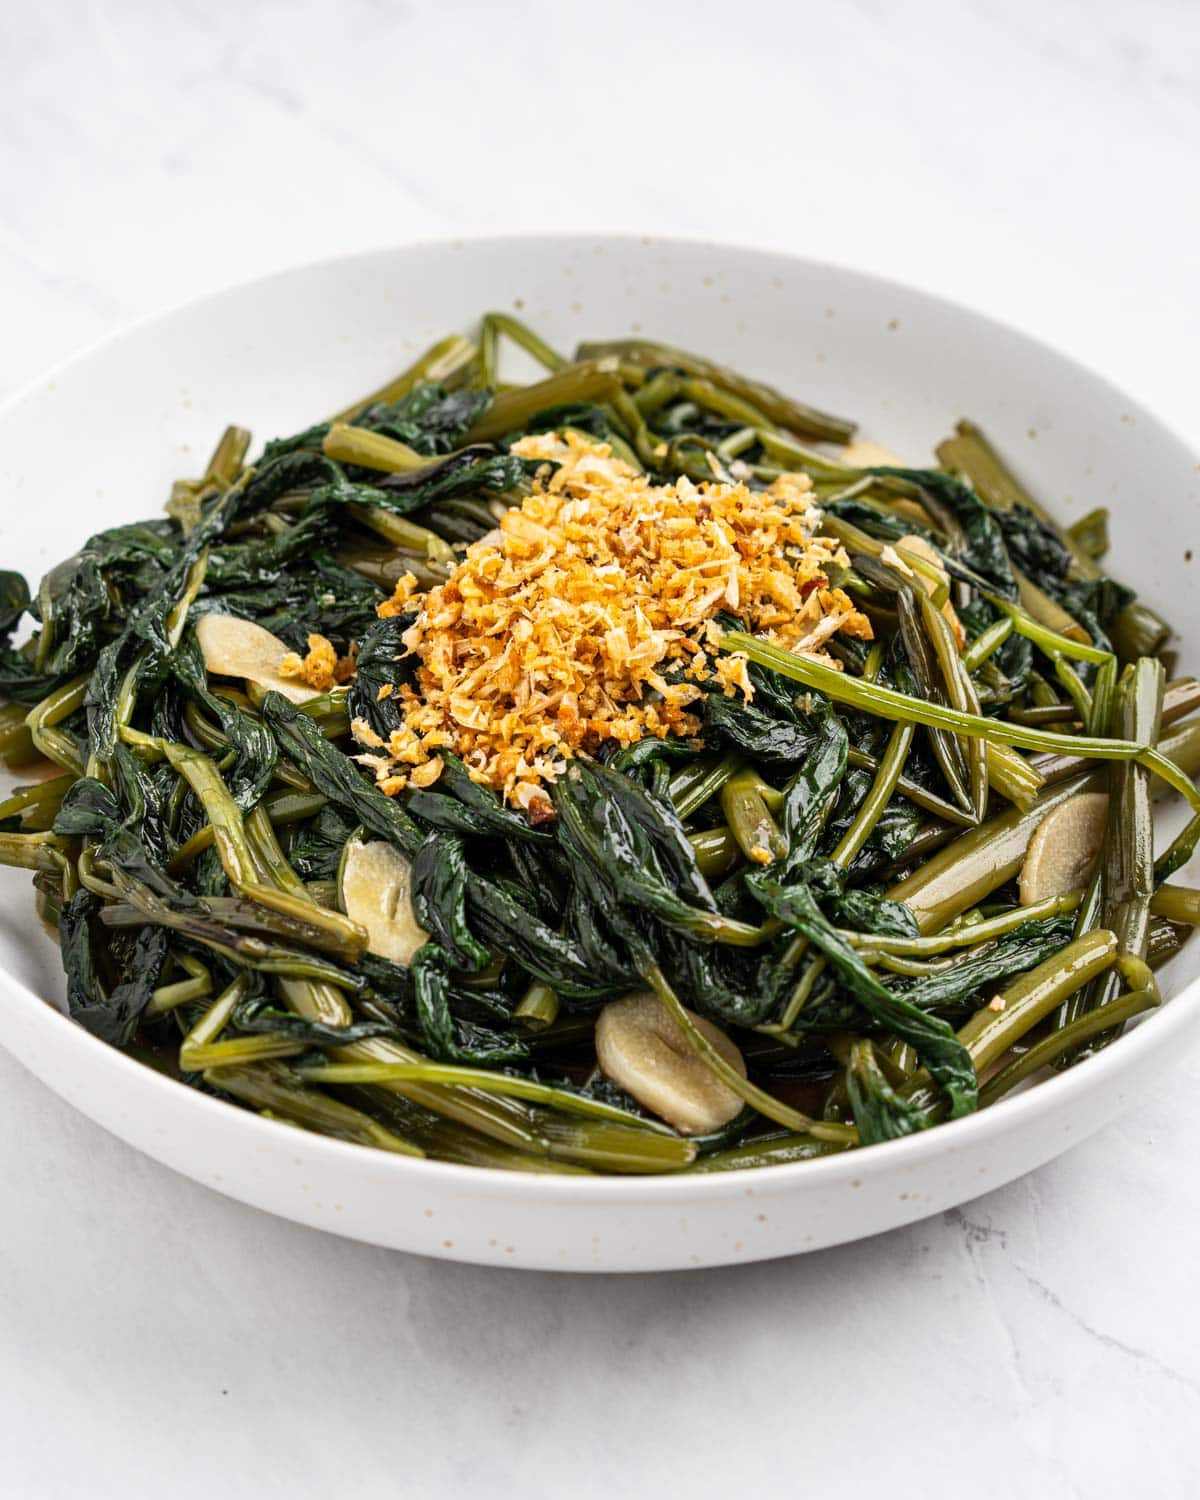 Plate of water spinach stir fried with garlic slices and topped with fried garlic.